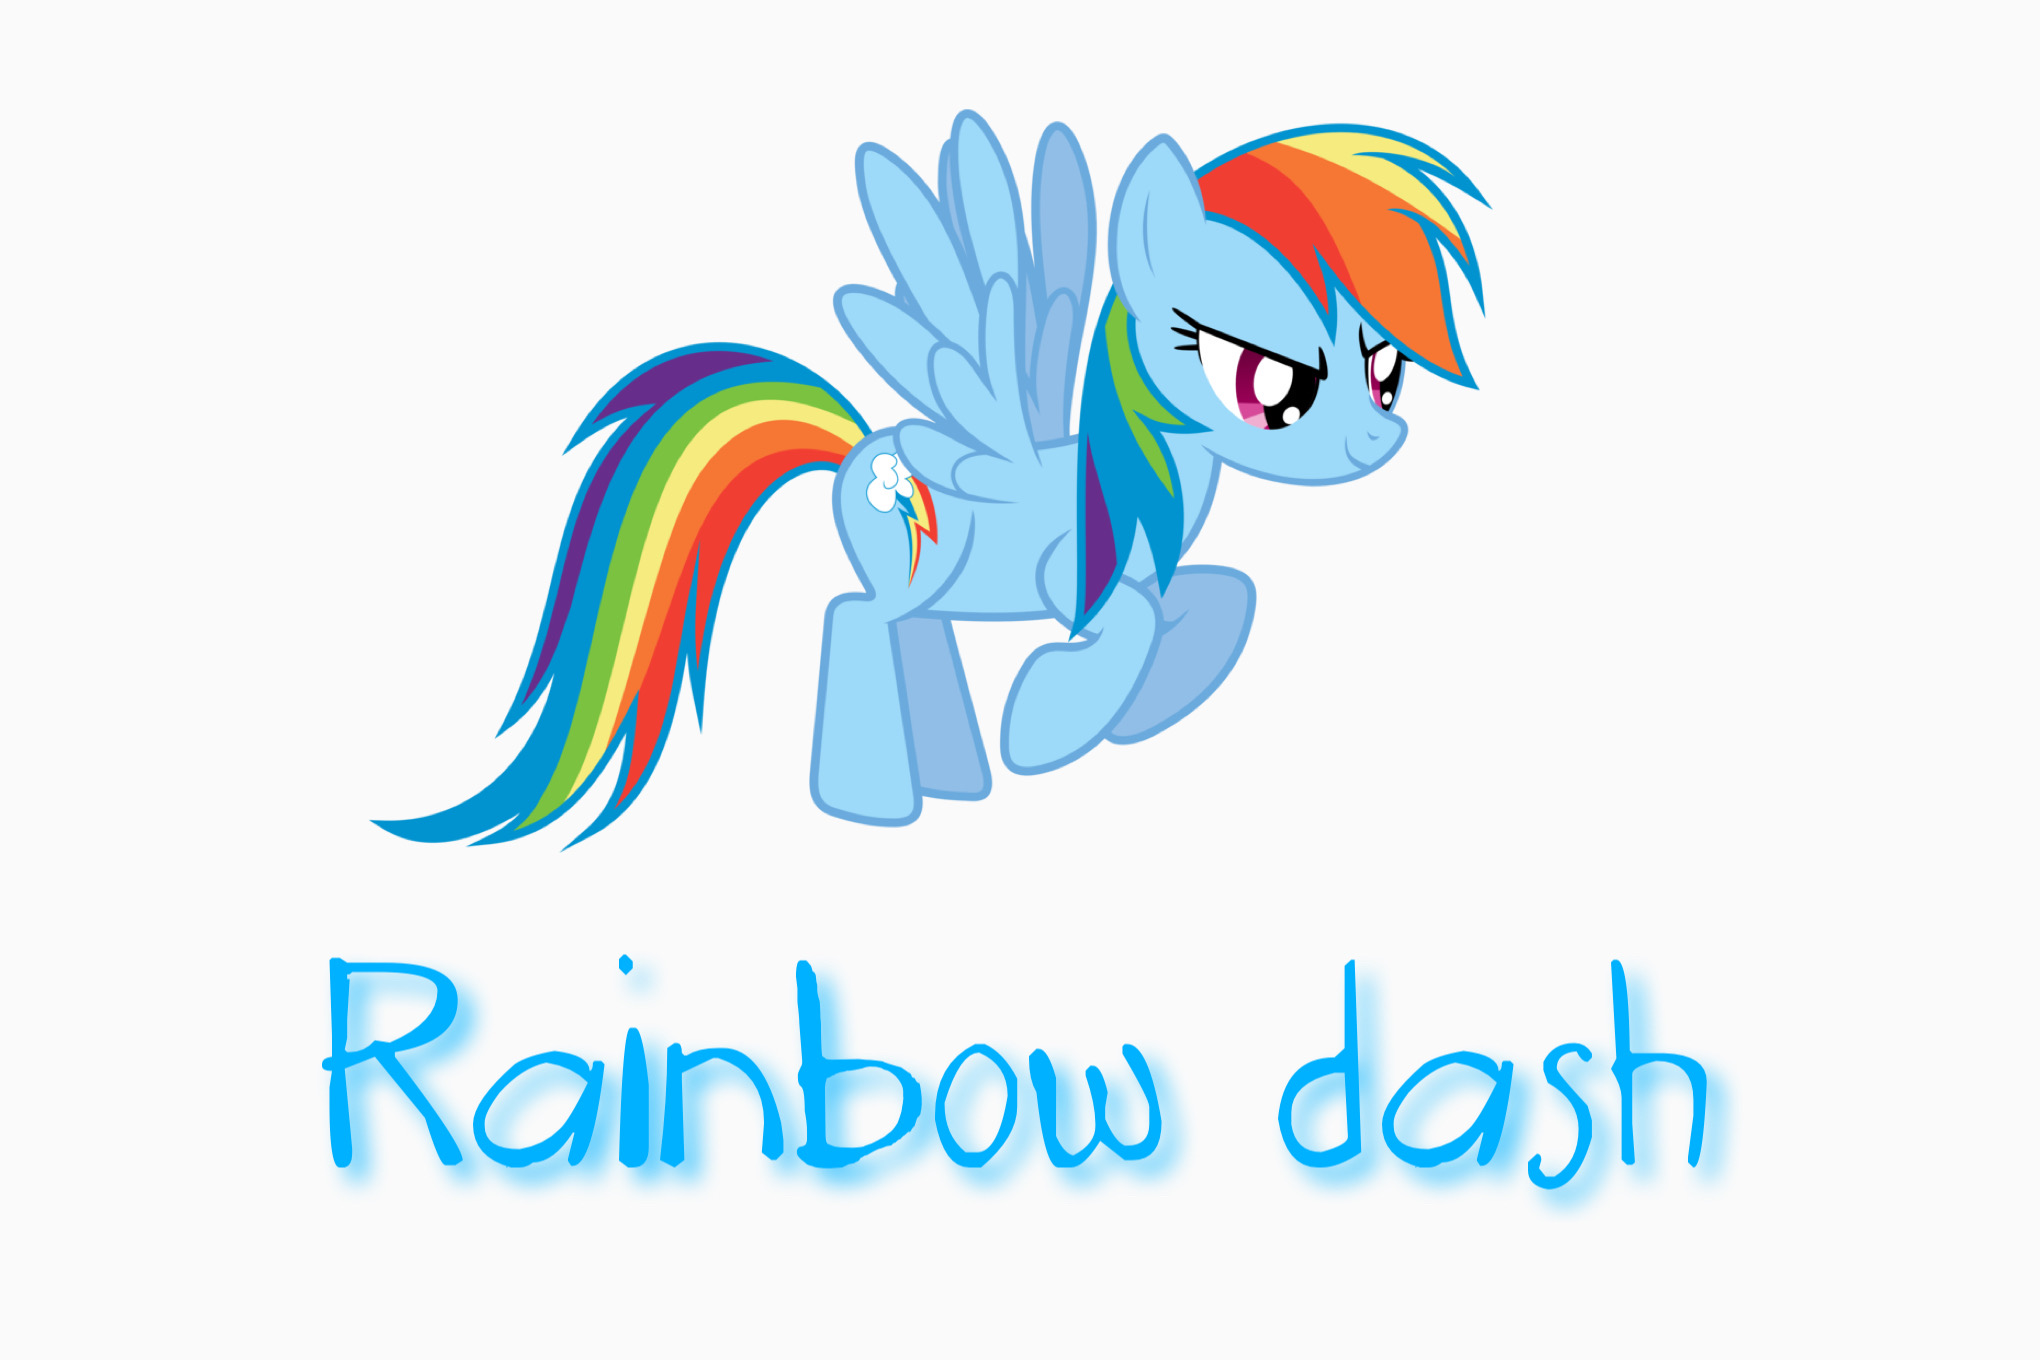 Rainbow dashes name written in BE letters by jaxbax12345 on DeviantArt